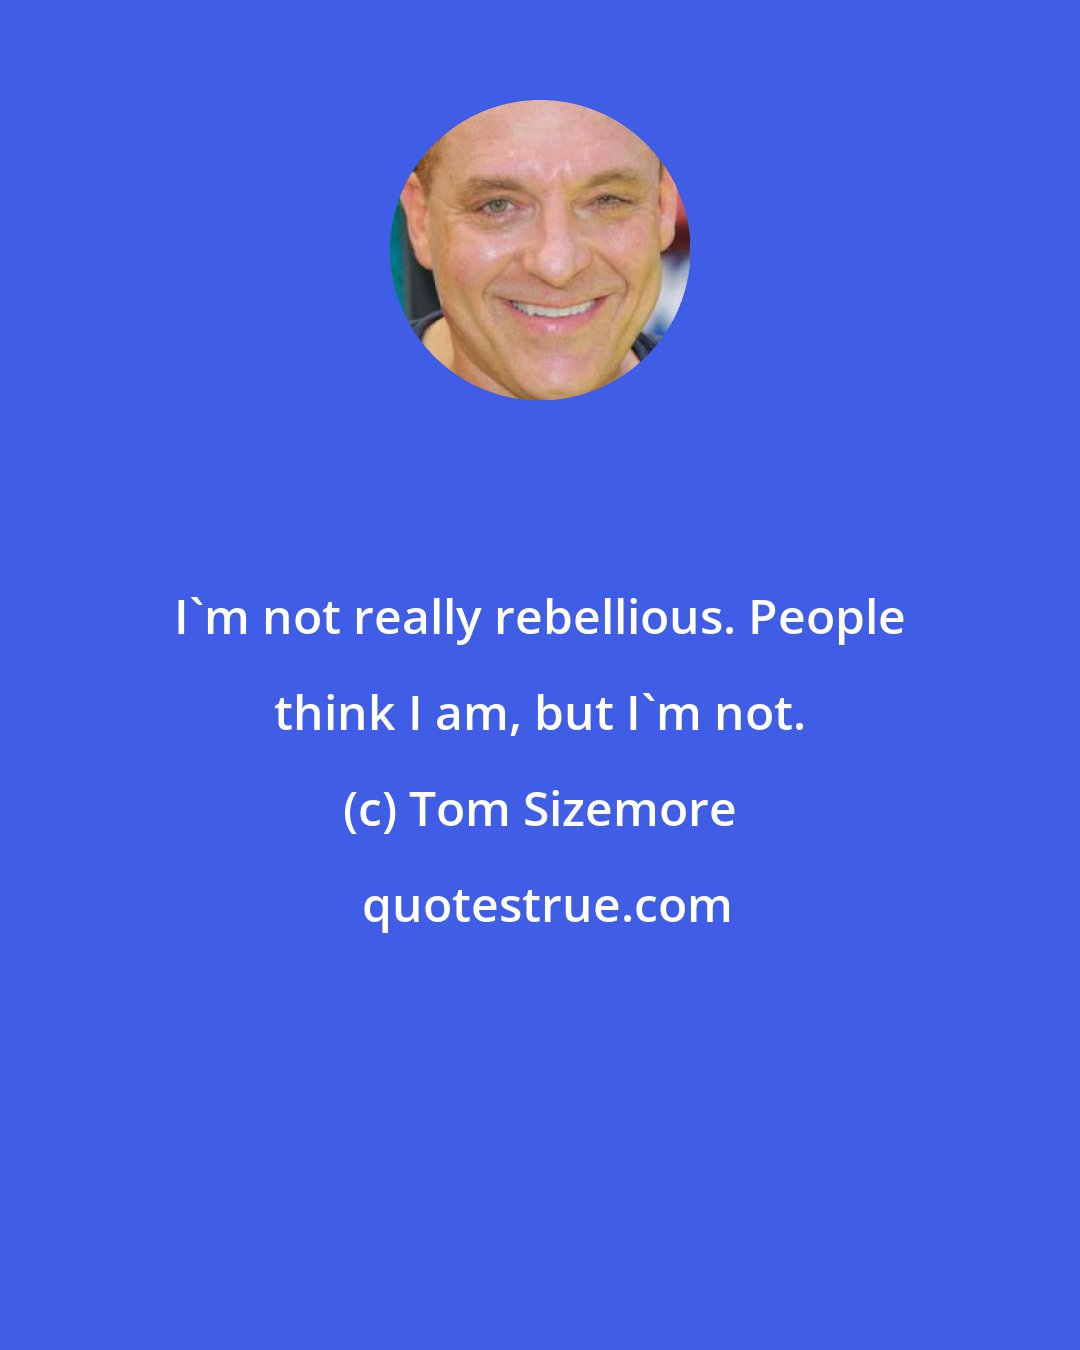 Tom Sizemore: I'm not really rebellious. People think I am, but I'm not.